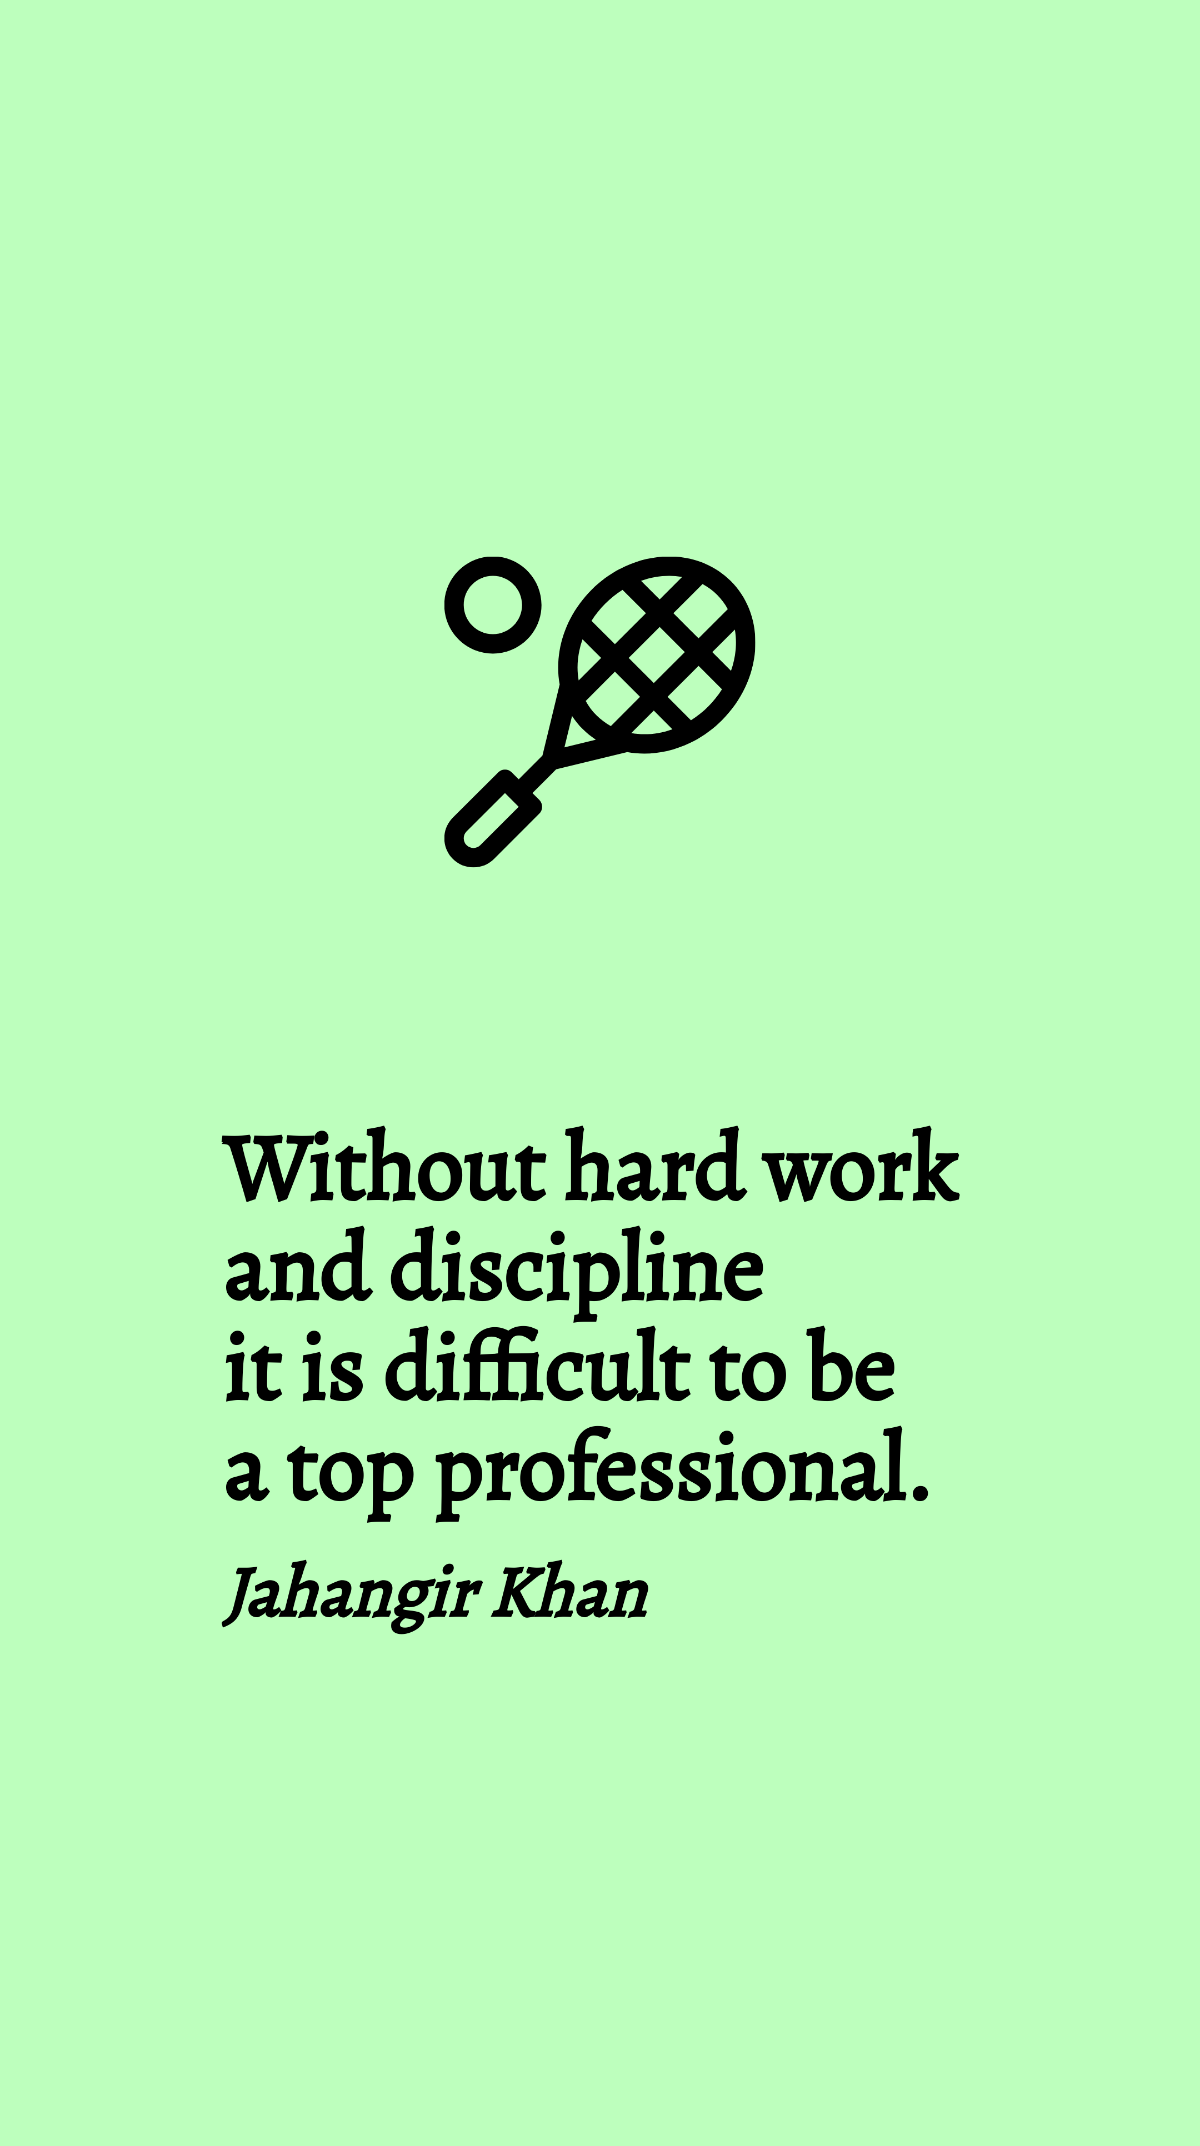 Free Jahangir Khan - Without hard work and discipline it is difficult to be a top professional. Template